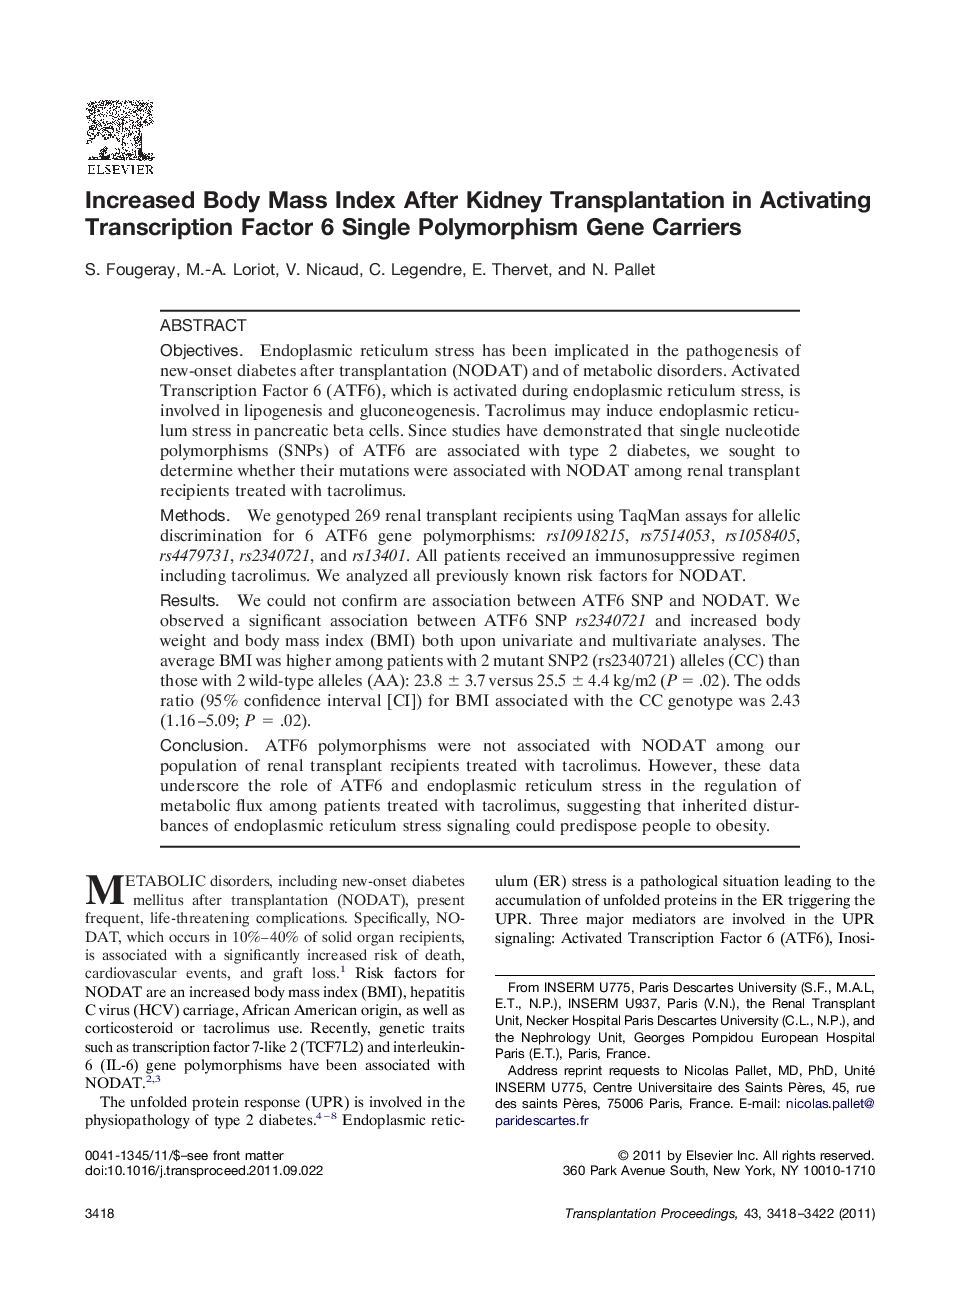 Increased Body Mass Index After Kidney Transplantation in Activating Transcription Factor 6 Single Polymorphism Gene Carriers